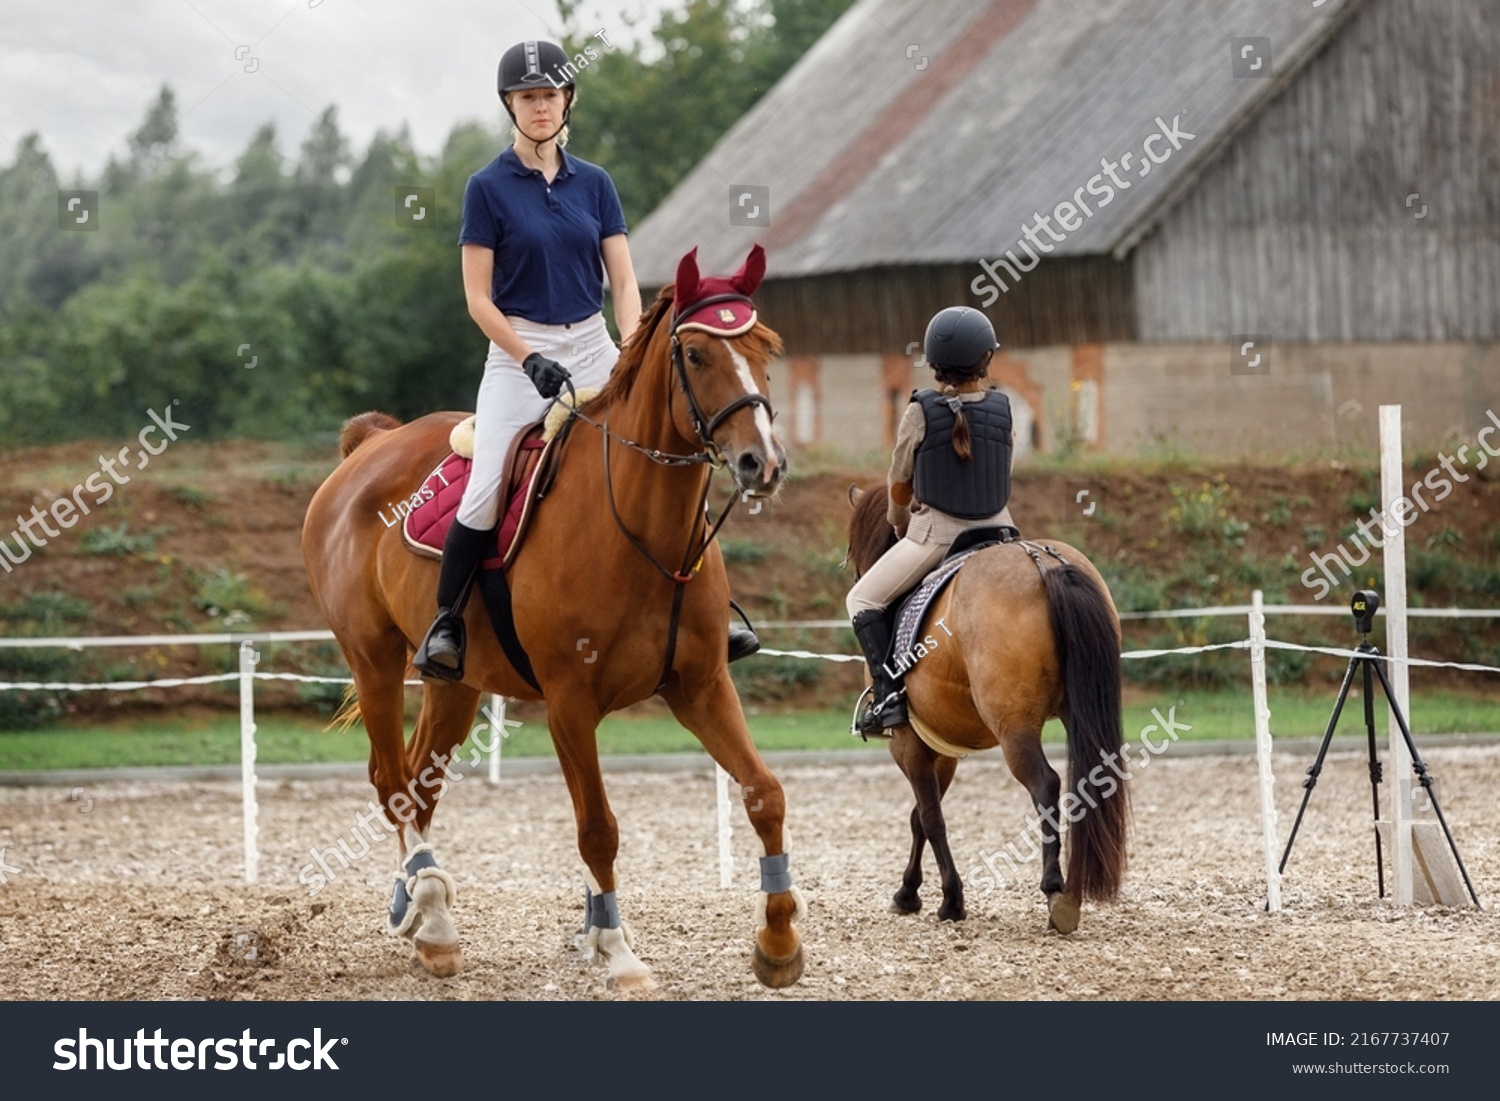 Equestrian sport -young girl rides on horse and little girl rides on pony in during training. #2167737407